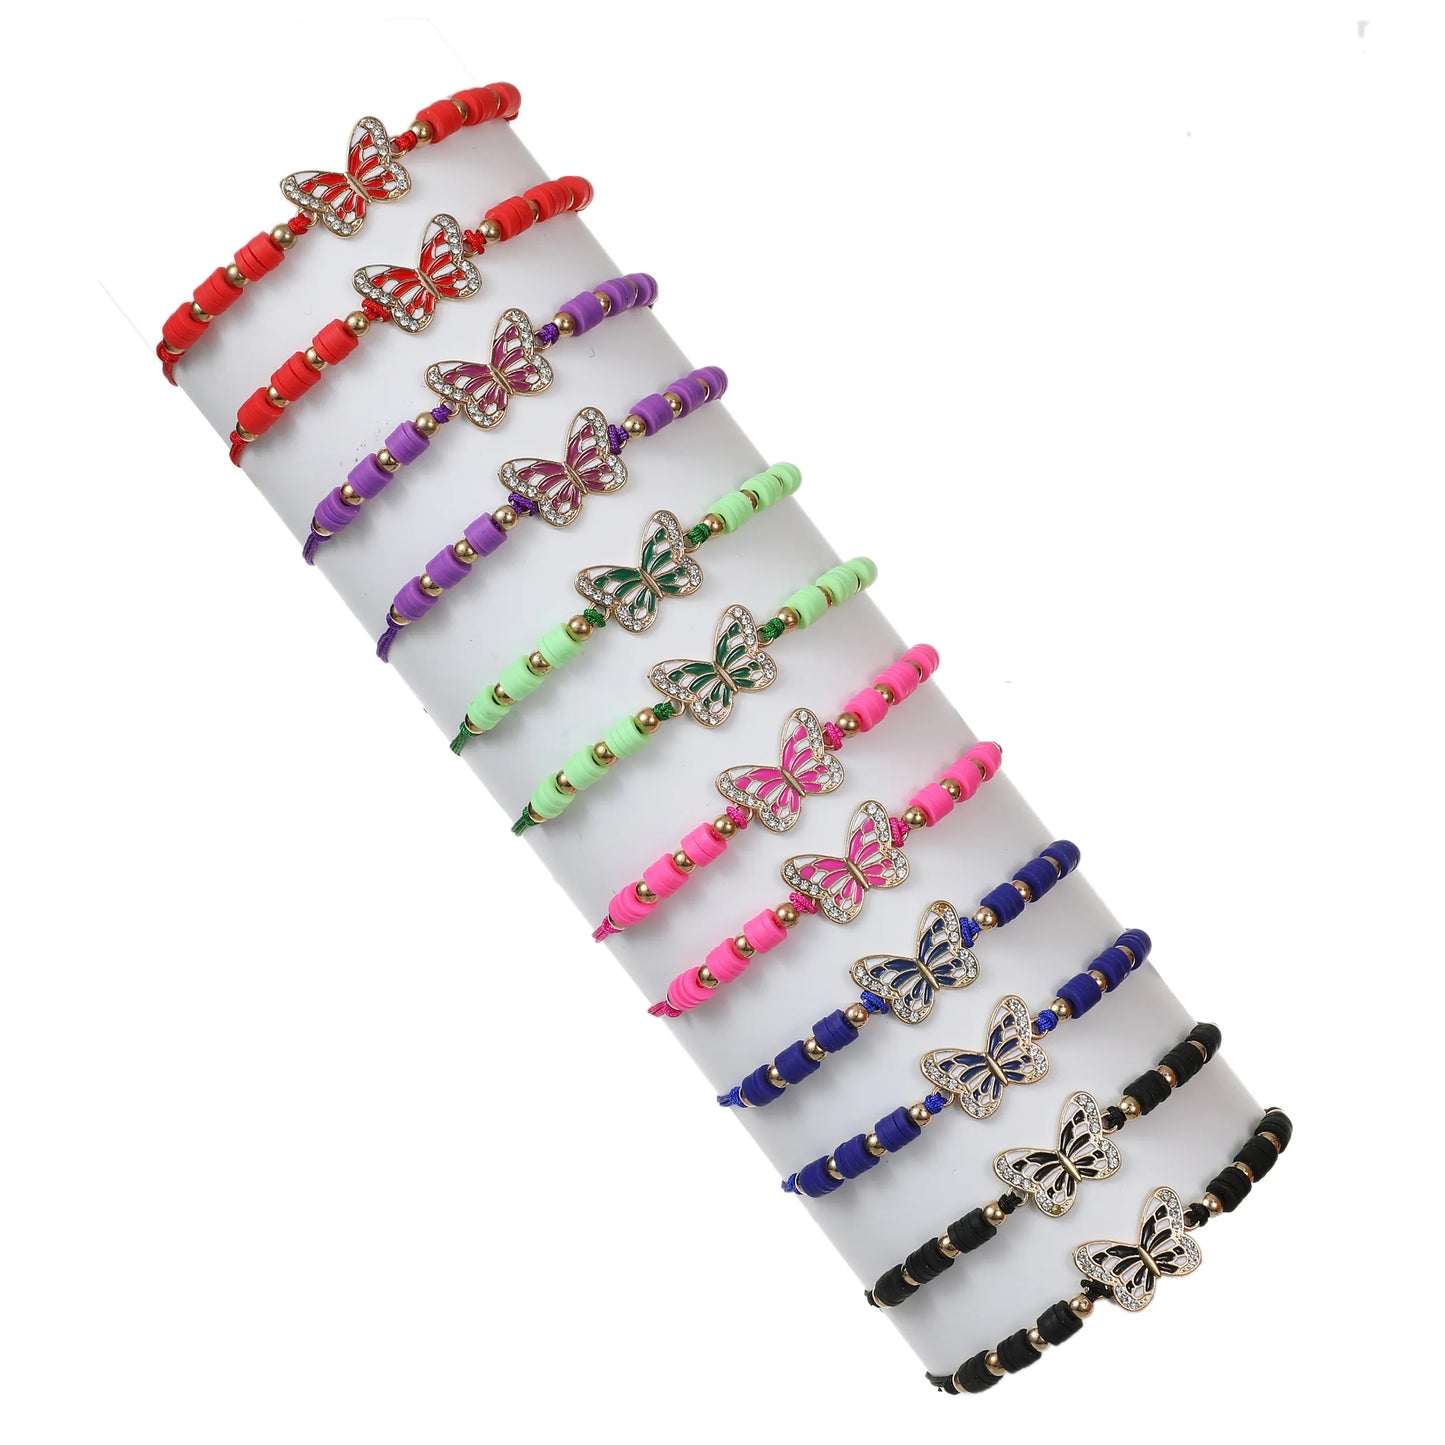 12pcs/lot Butterfly Pendant Braided Bracelets for Women Animal Colored Polymer Clay Adjustable Woven Rope Bohemia Jewelry